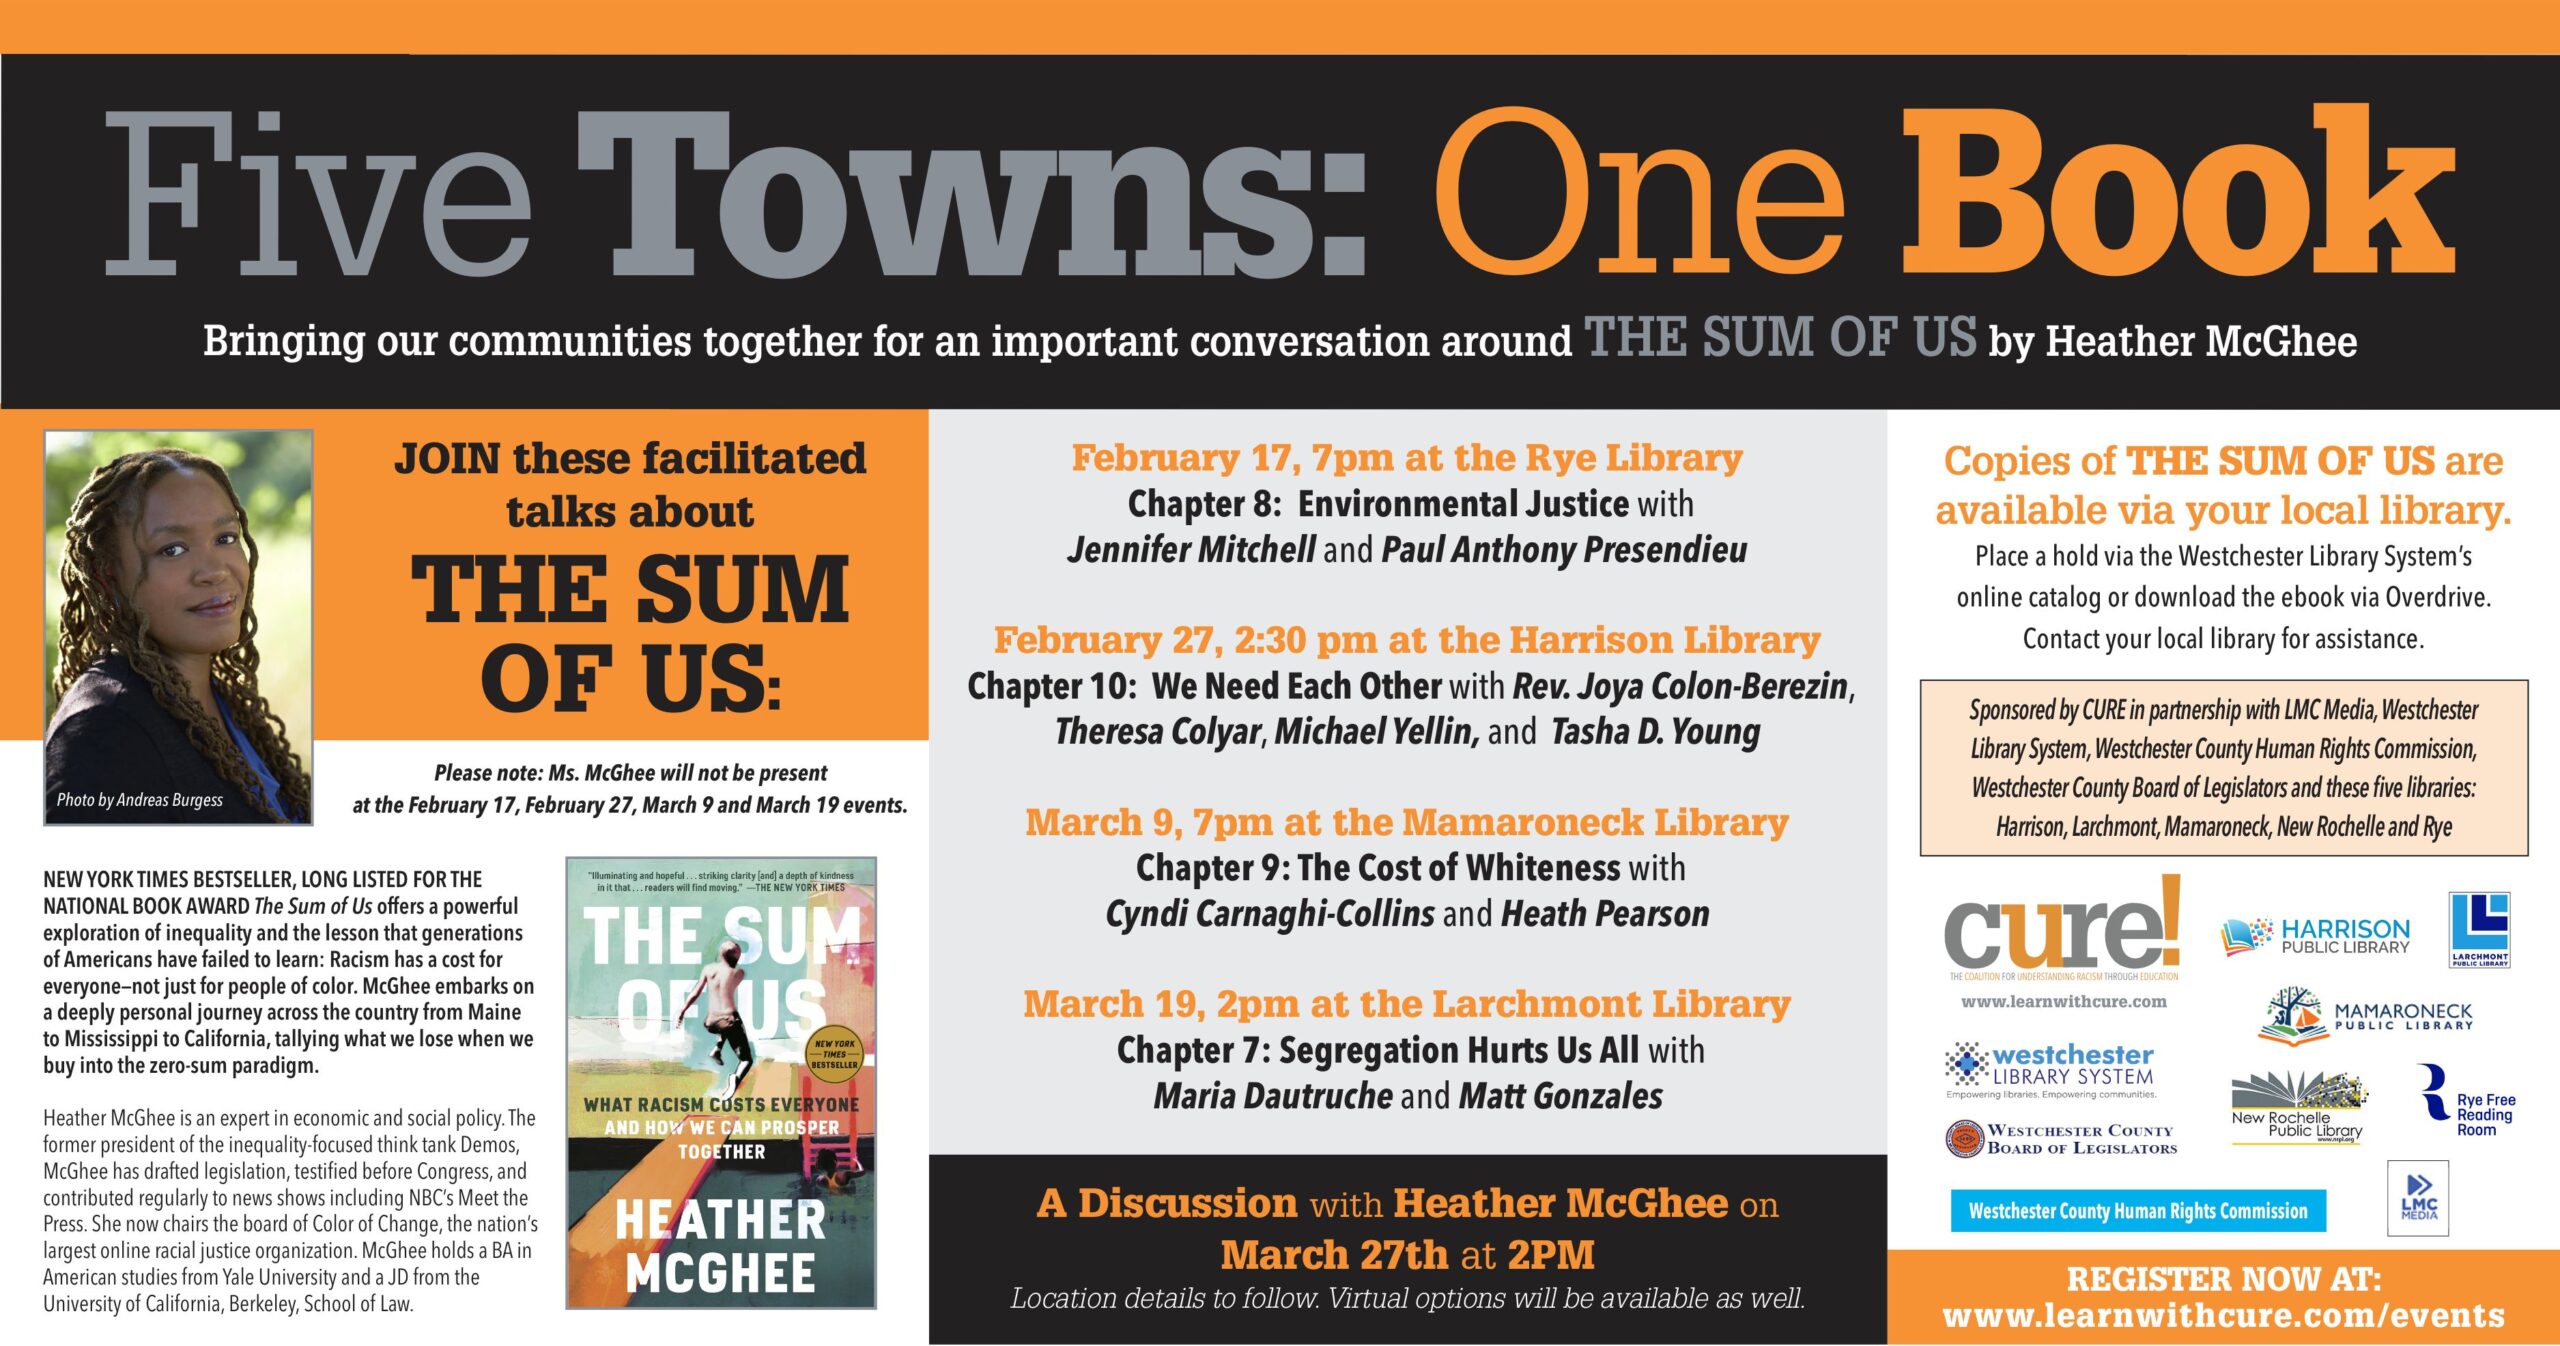 5 towns one book: the sum of us by heather mcghee - March 9th at MPL